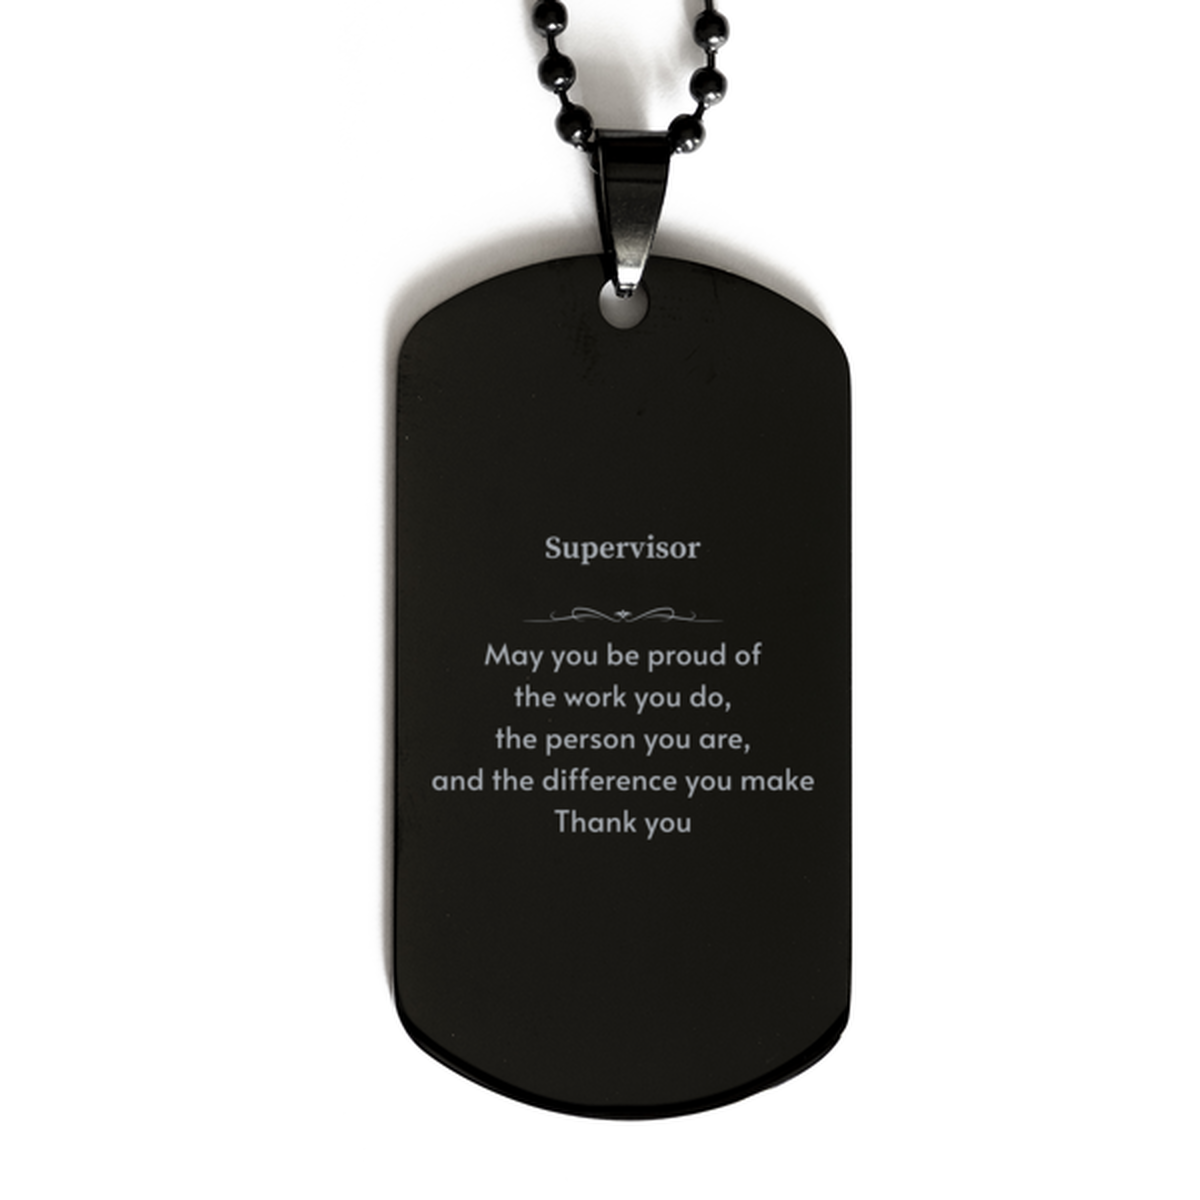 Heartwarming Black Dog Tag Retirement Coworkers Gifts for Supervisor, Supervisor May You be proud of the work you do, the person you are Gifts for Boss Men Women Friends